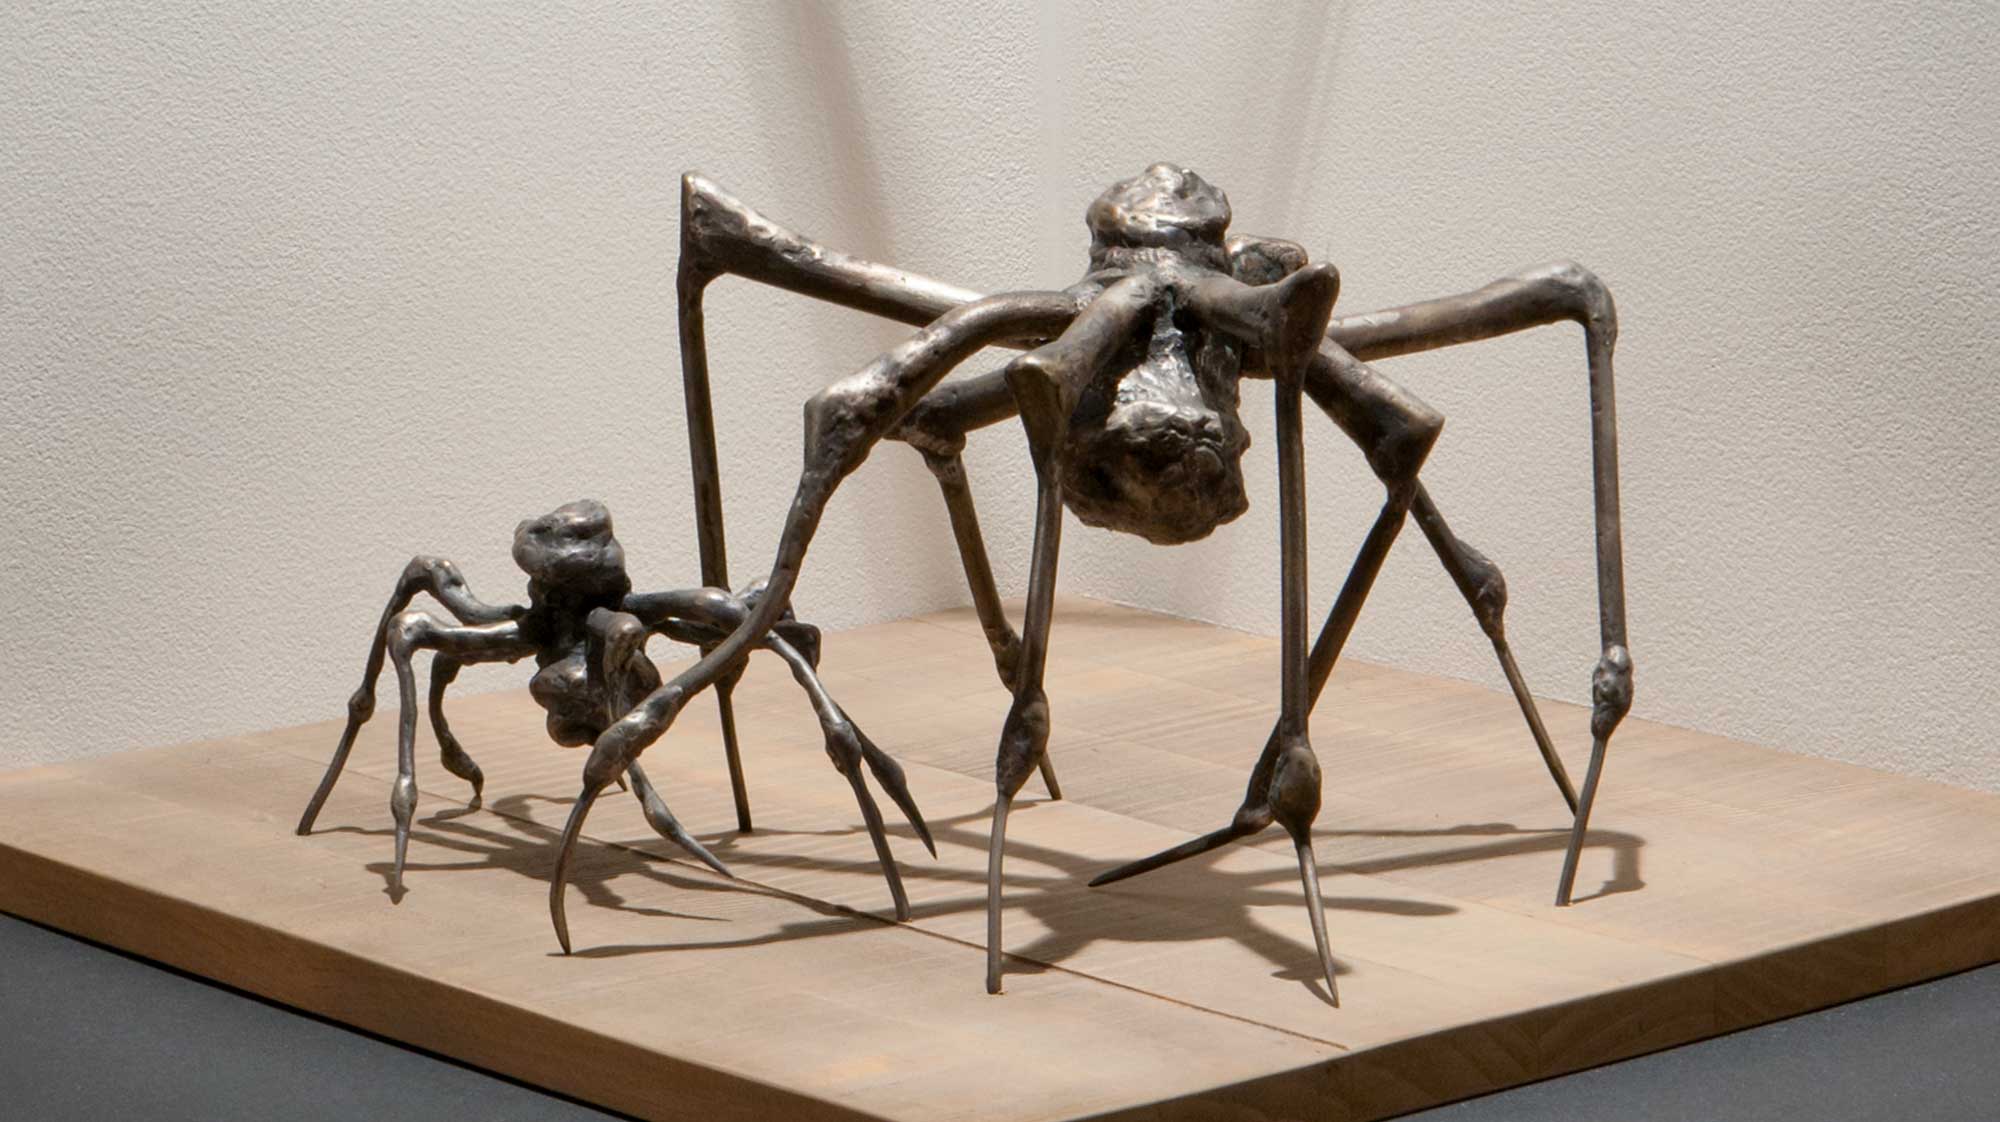 louis bourgeois made giant spiders